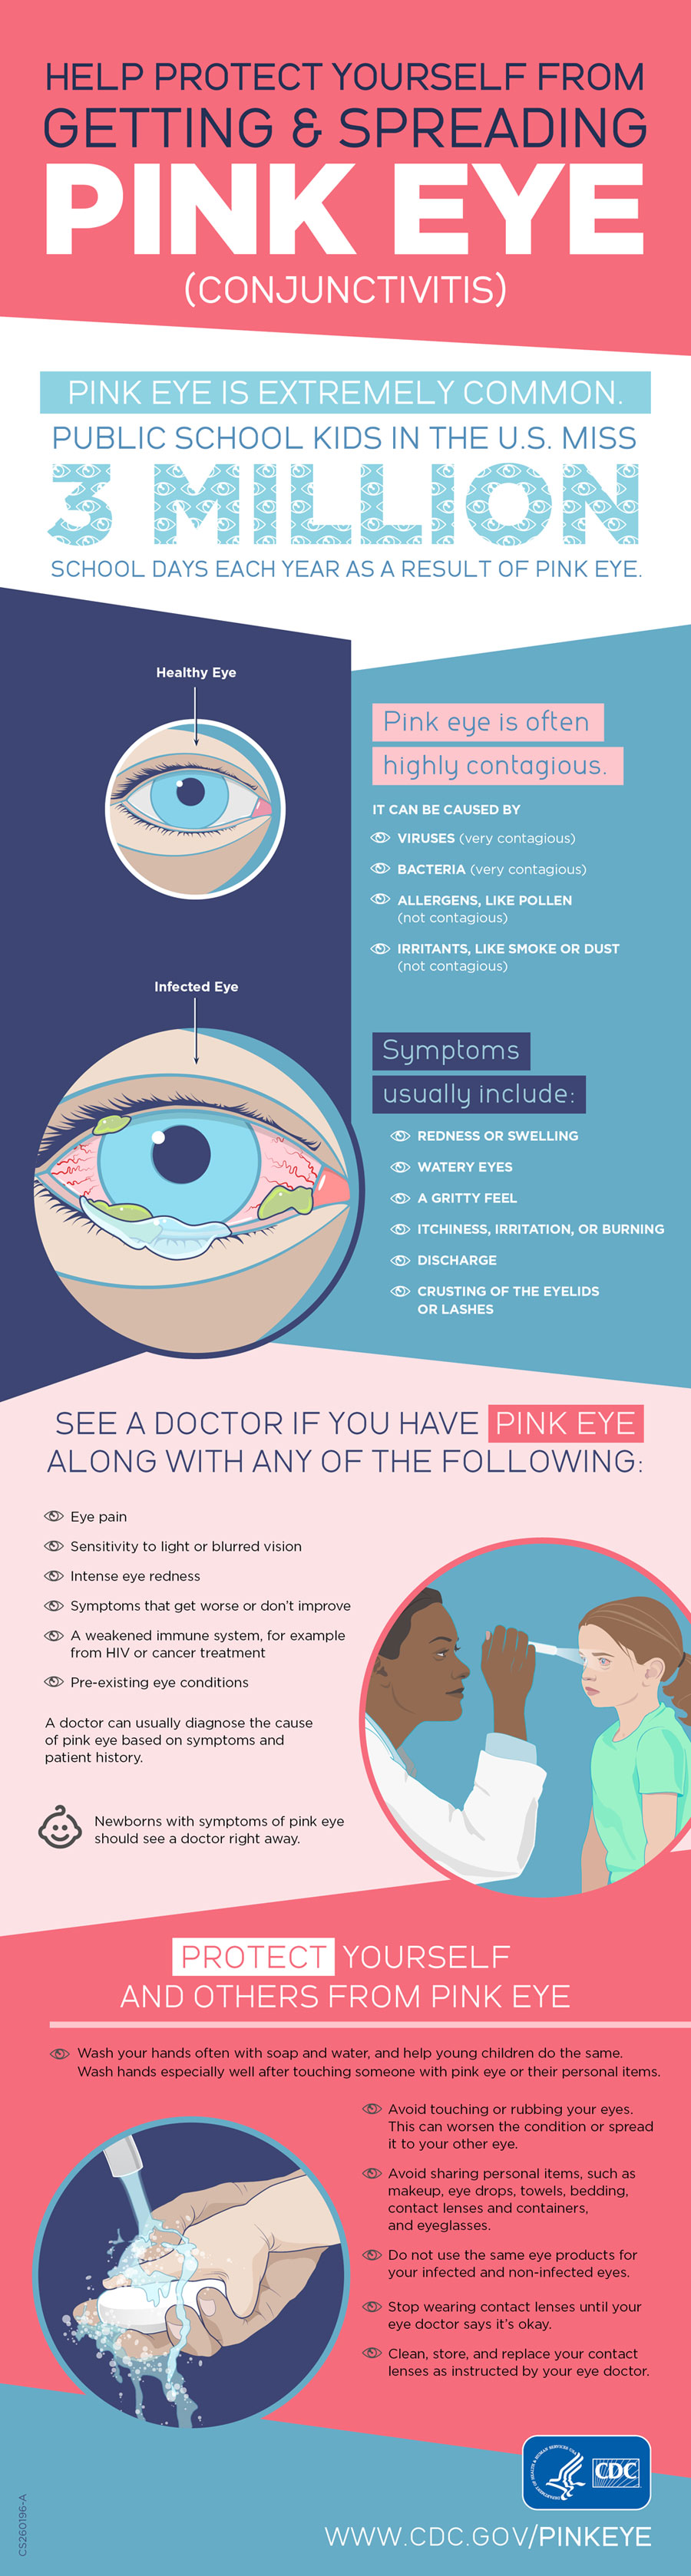 Help protect yourself from getting and spreading Pink Eye (conjunctivitis)